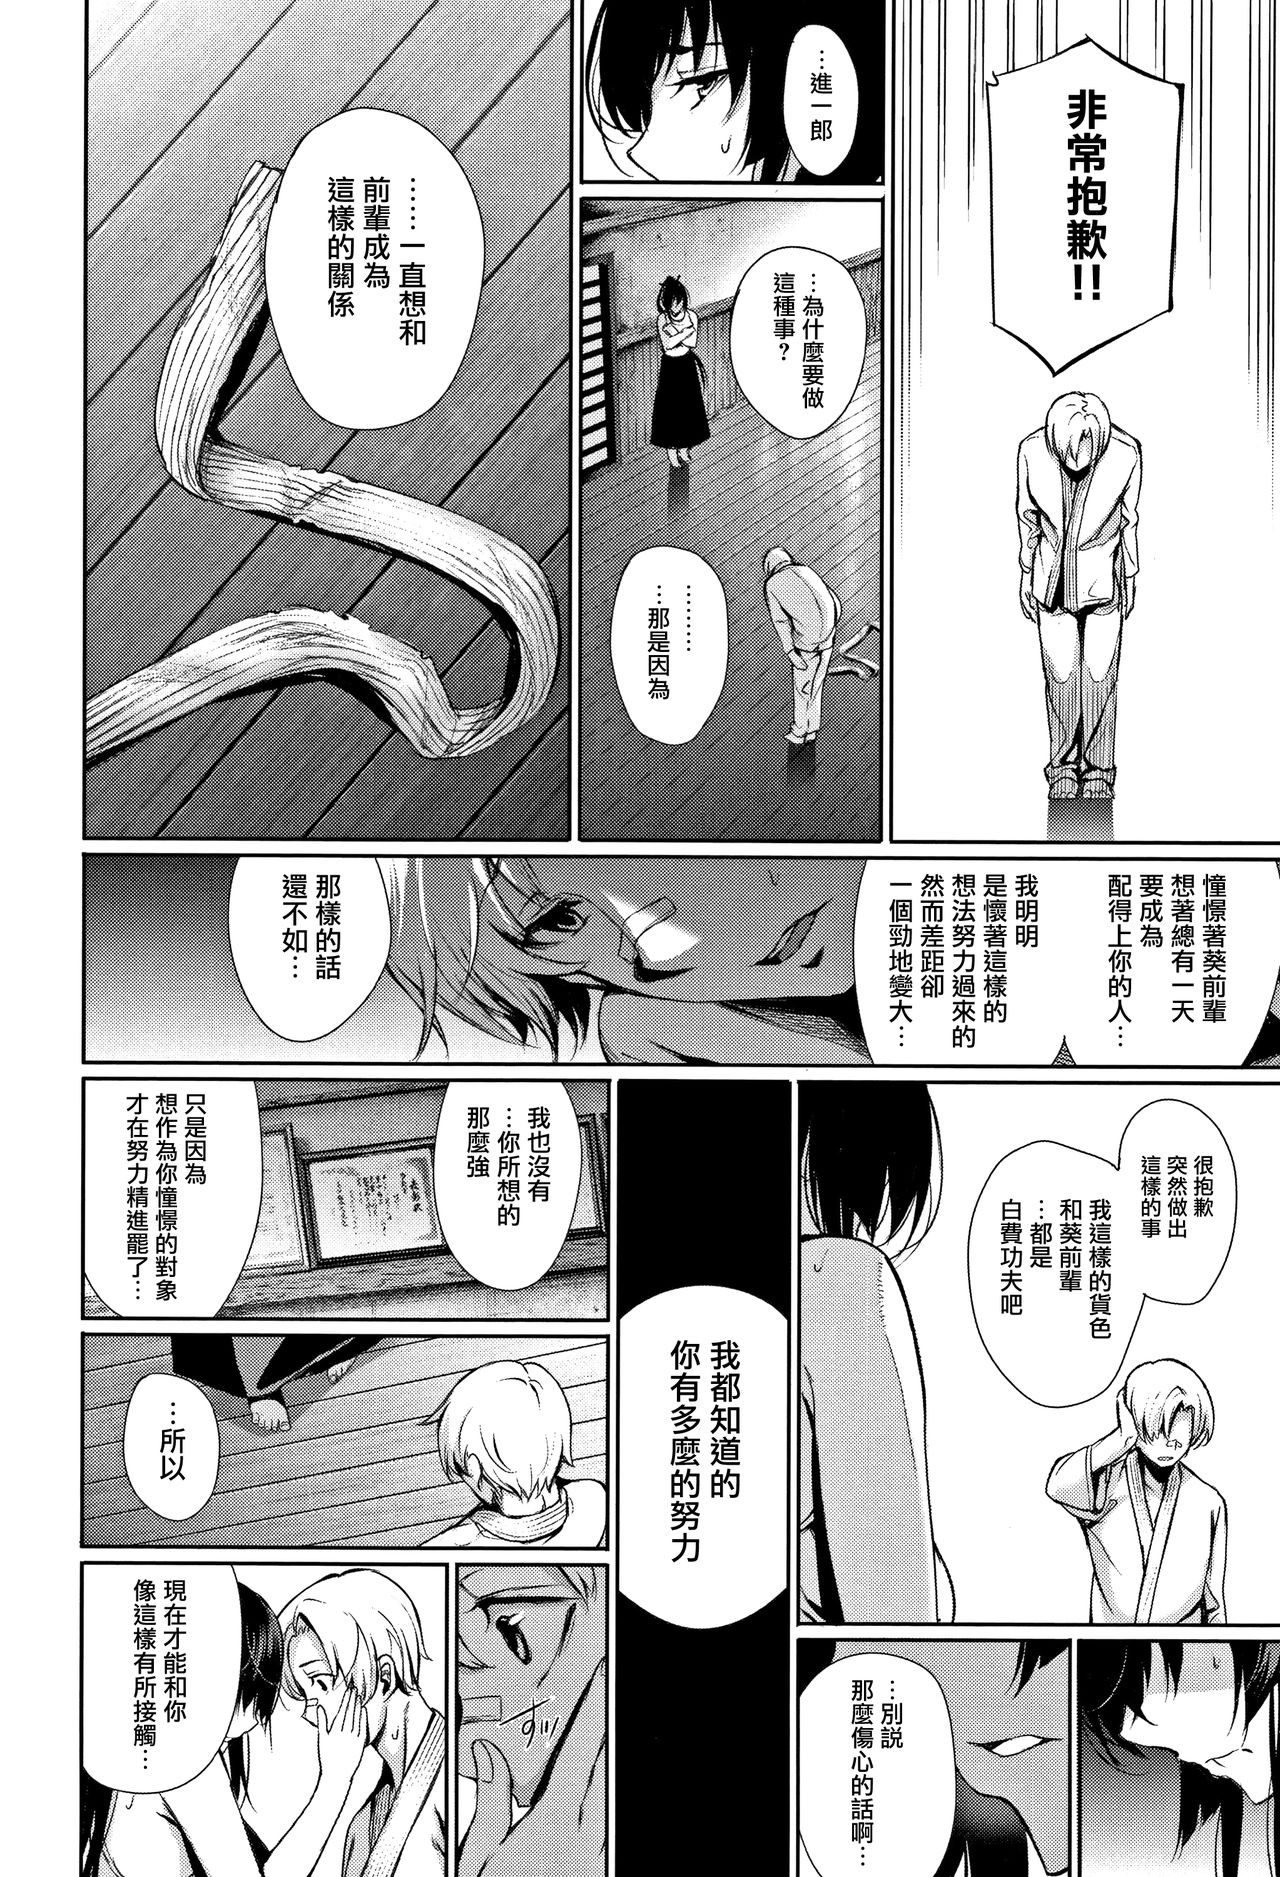 [Gentsuki] Kimi Omou Koi - I think of you. Ch. 1-2 [Chinese] [无毒汉化组] page 17 full